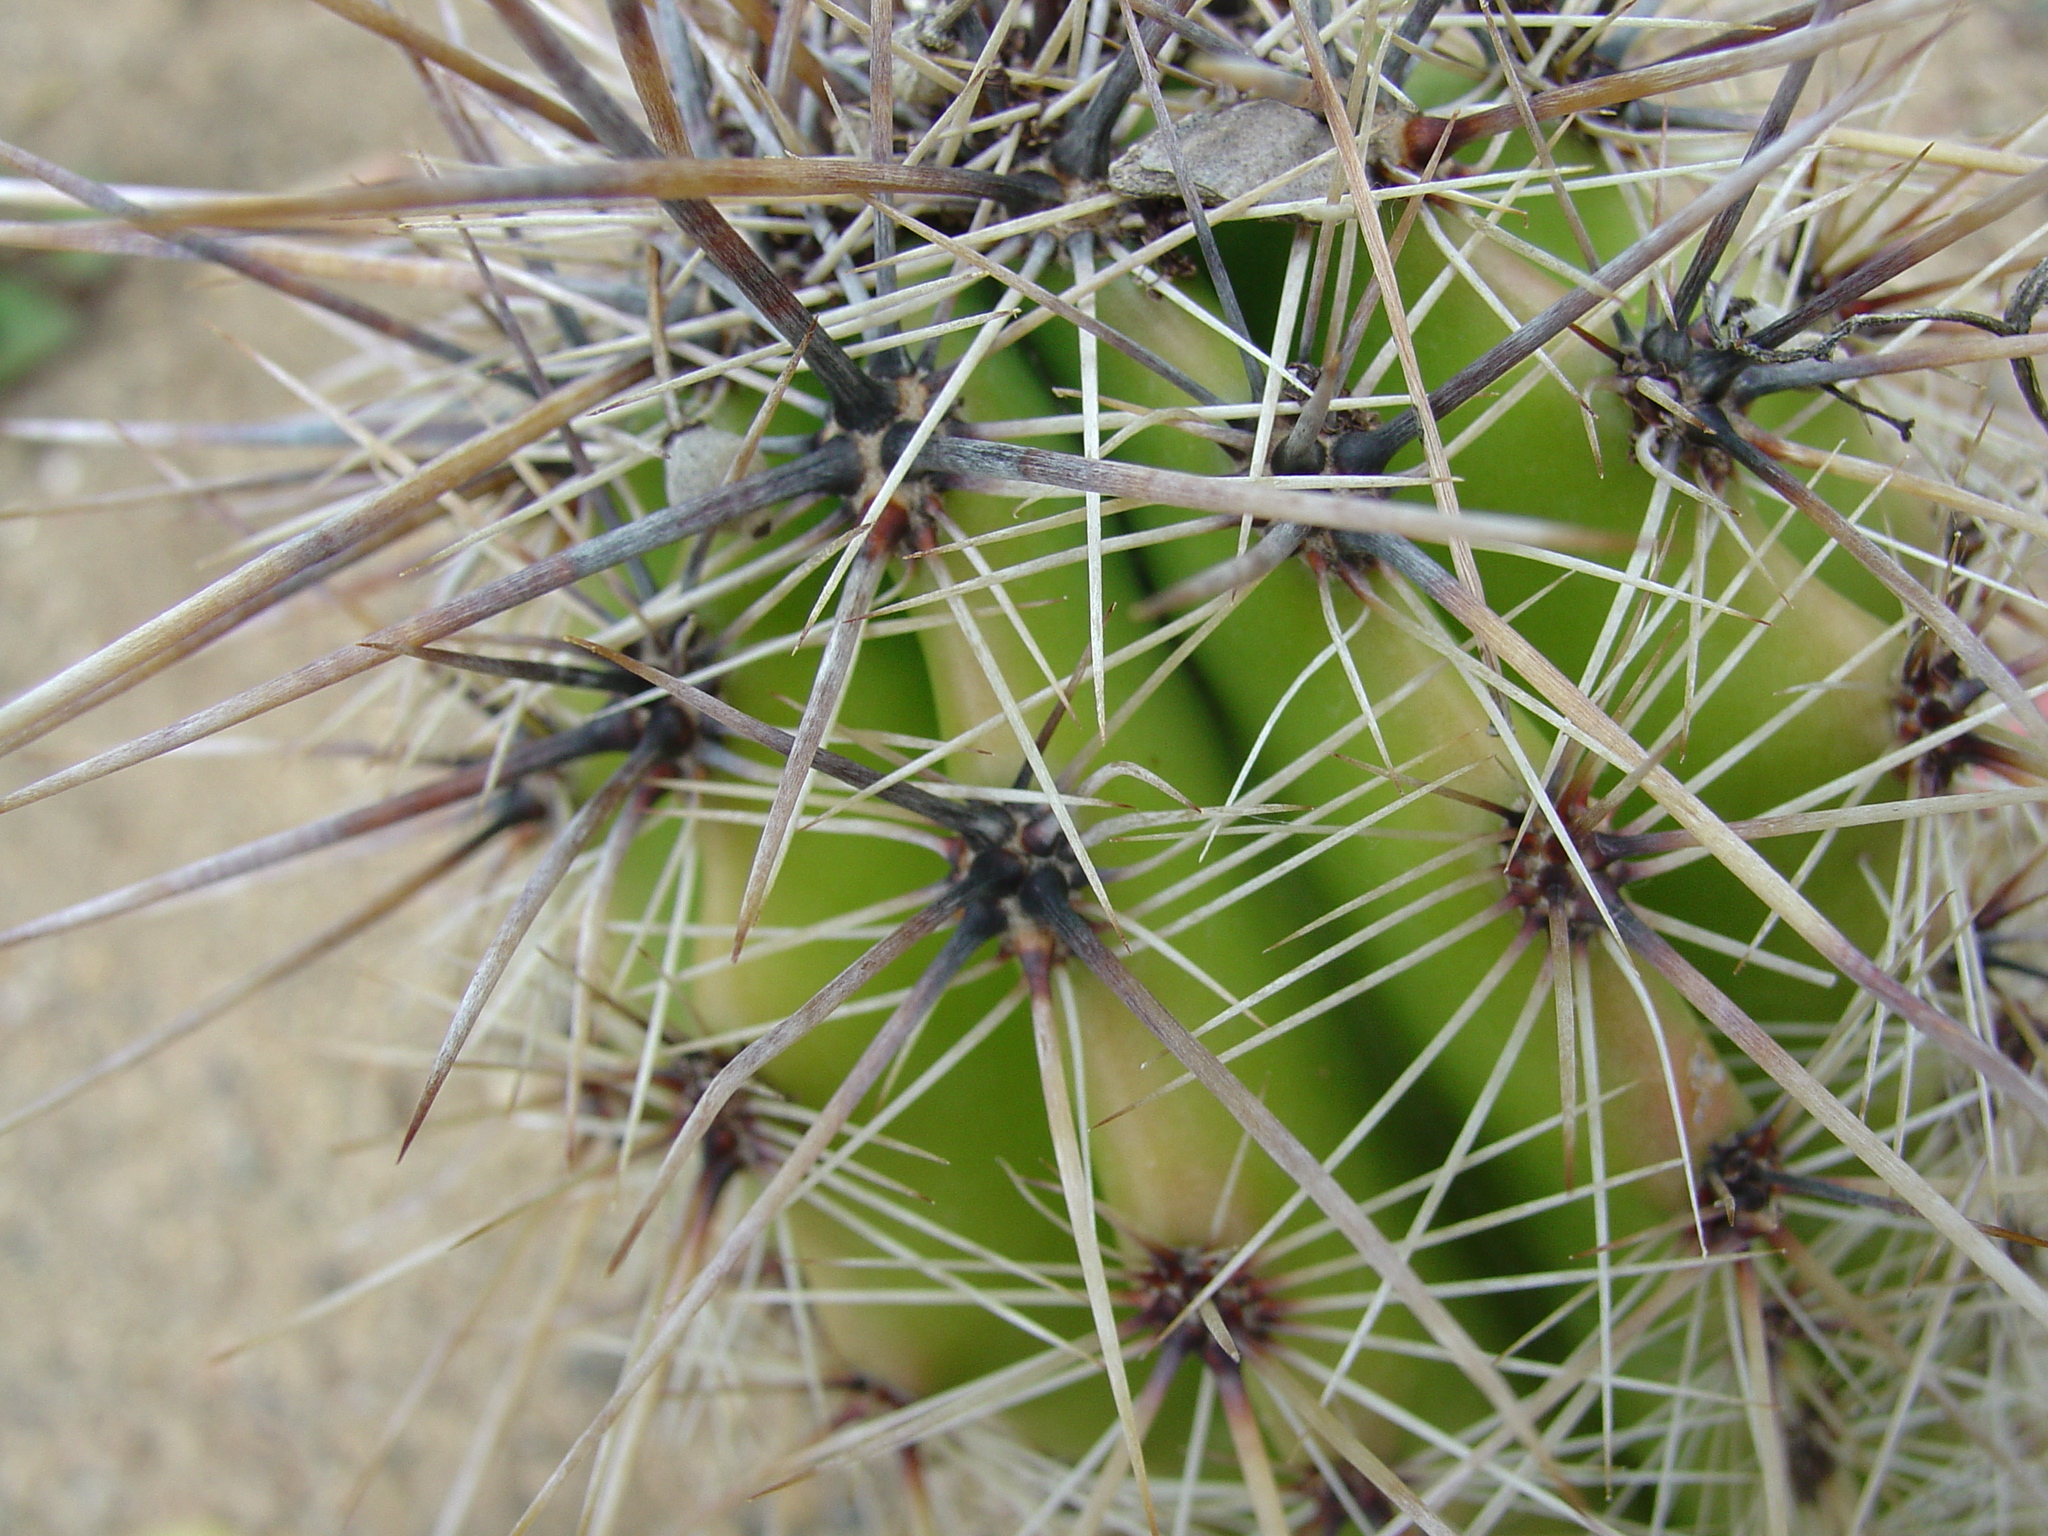 View image - Cactus Thorns - Abstract Influence